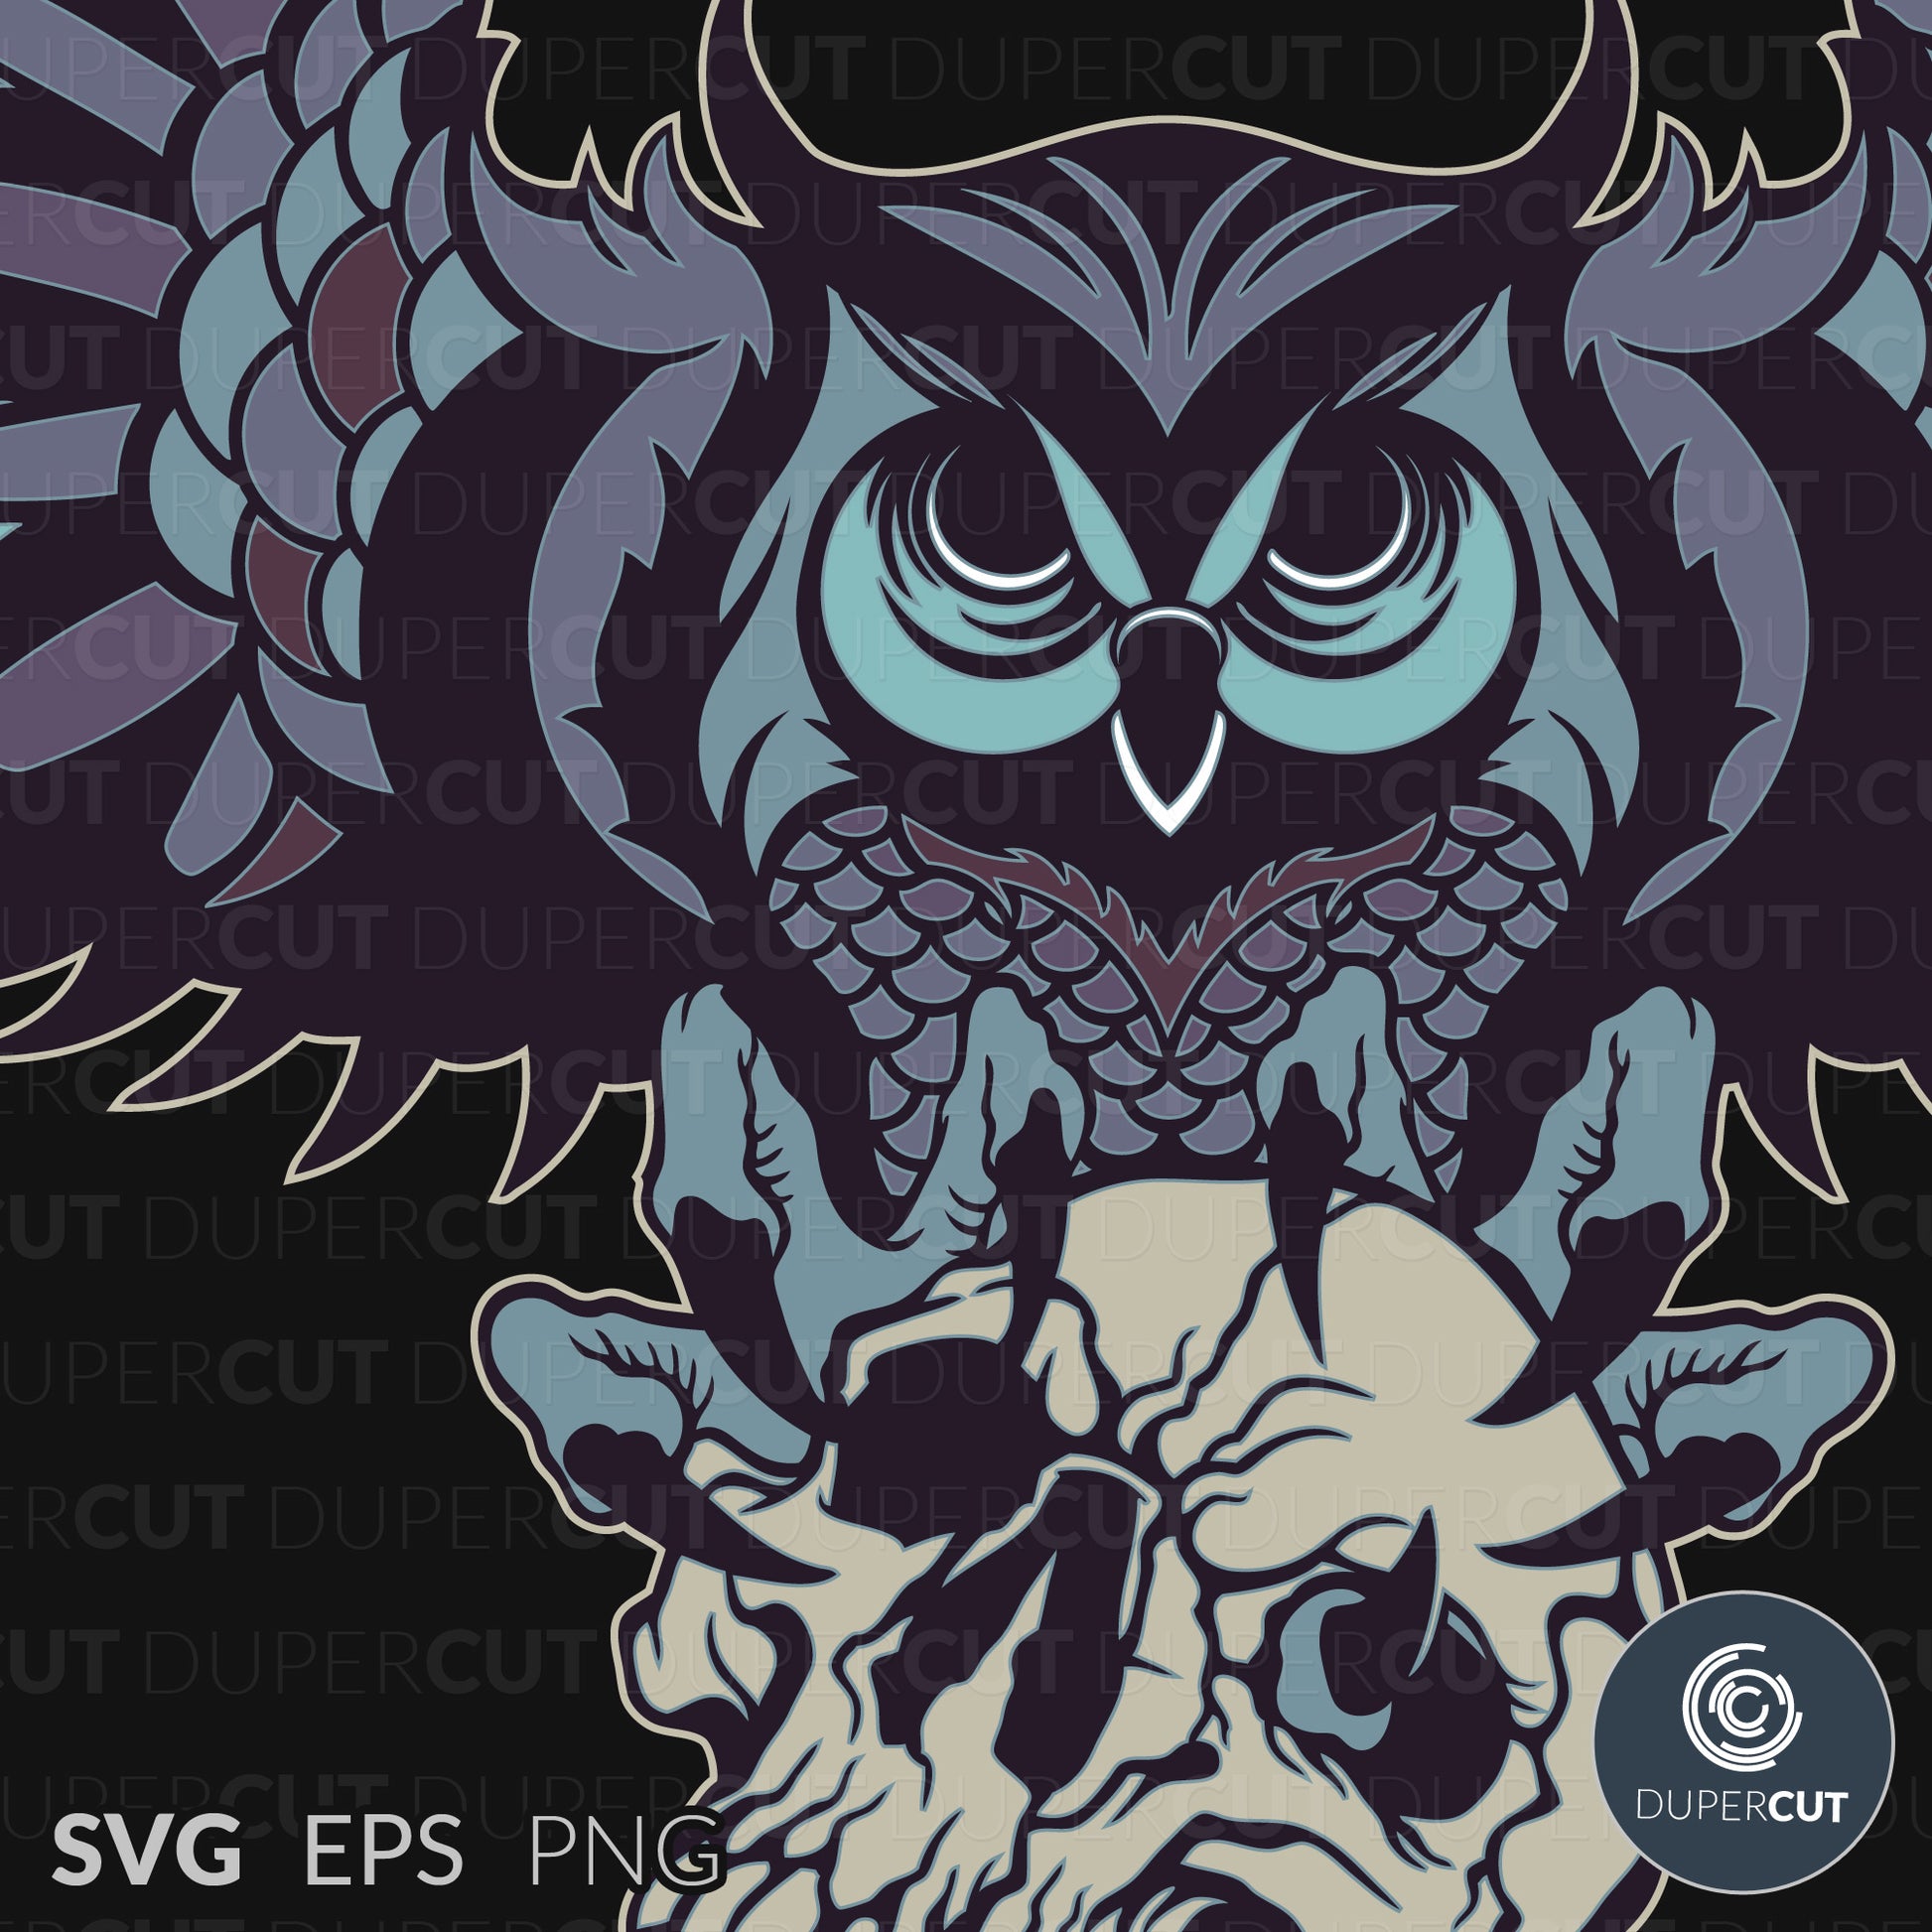 Abstract owl with skull - EPS, SVG, PNG files. Vector Colour illustration for print on demand, sublimation, custom t-shirts, hoodies, tumblers.